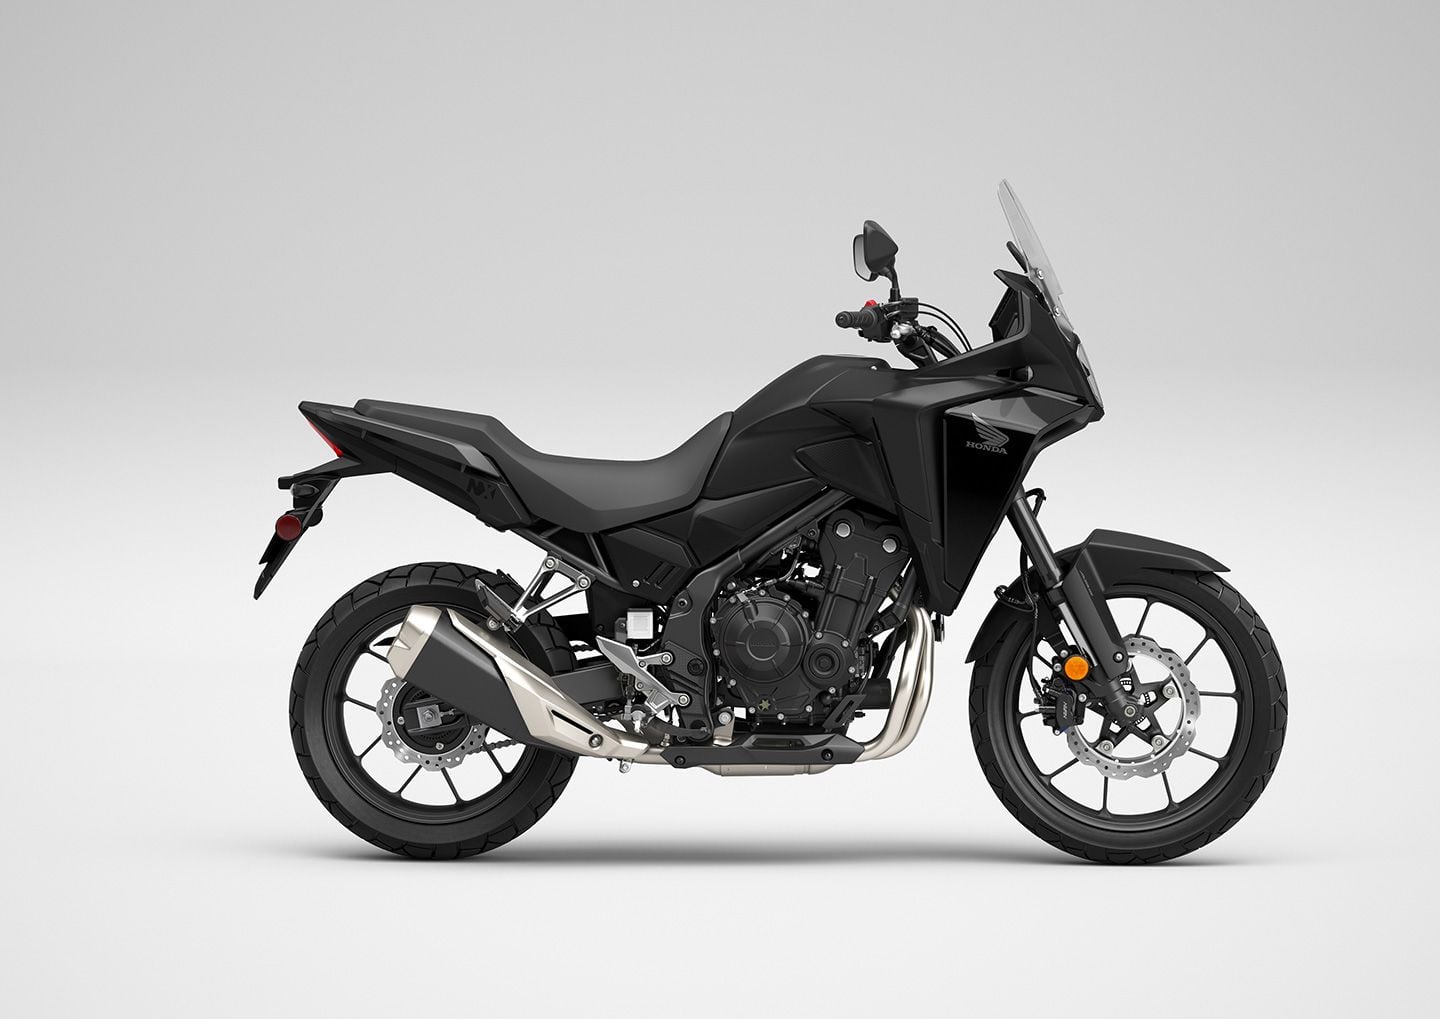 It packs the same 471cc parallel-twin engine and steel tube frame as the outgoing CB500X, but the 2024 NX500 also gets a new 5-inch TFT screen and traction control.